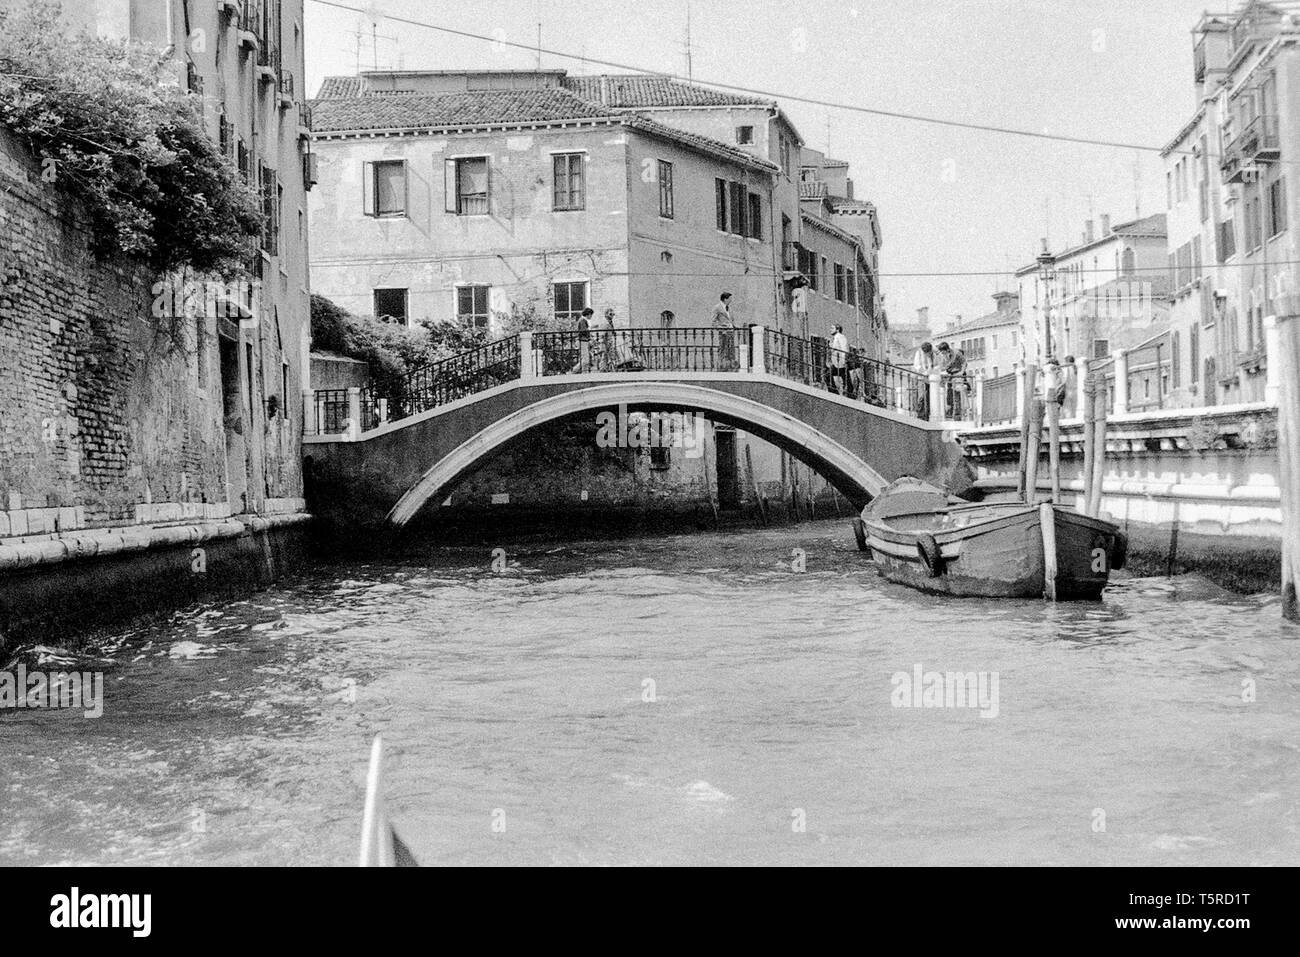 Venezia - Italy - 1980 - black and white photo: characteristic Venice canal, narrow between the houses with a small bridge in the foreground Stock Photo